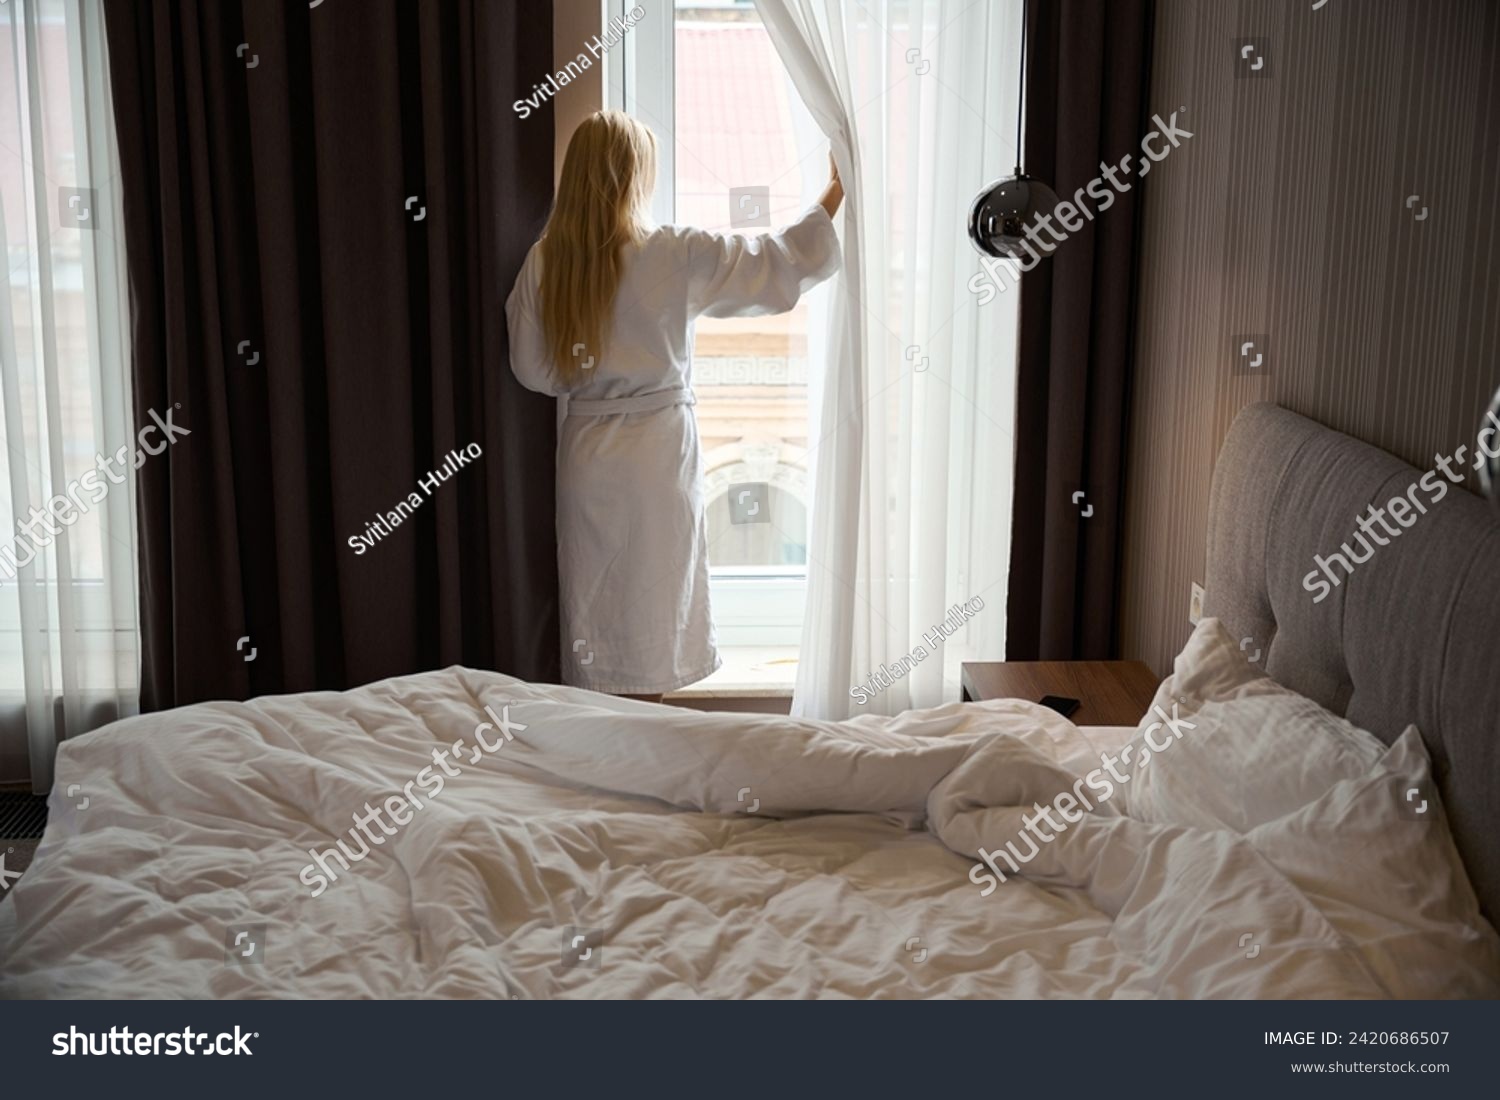 Woman standing in front of window in bedchamber after morning awakening #2420686507